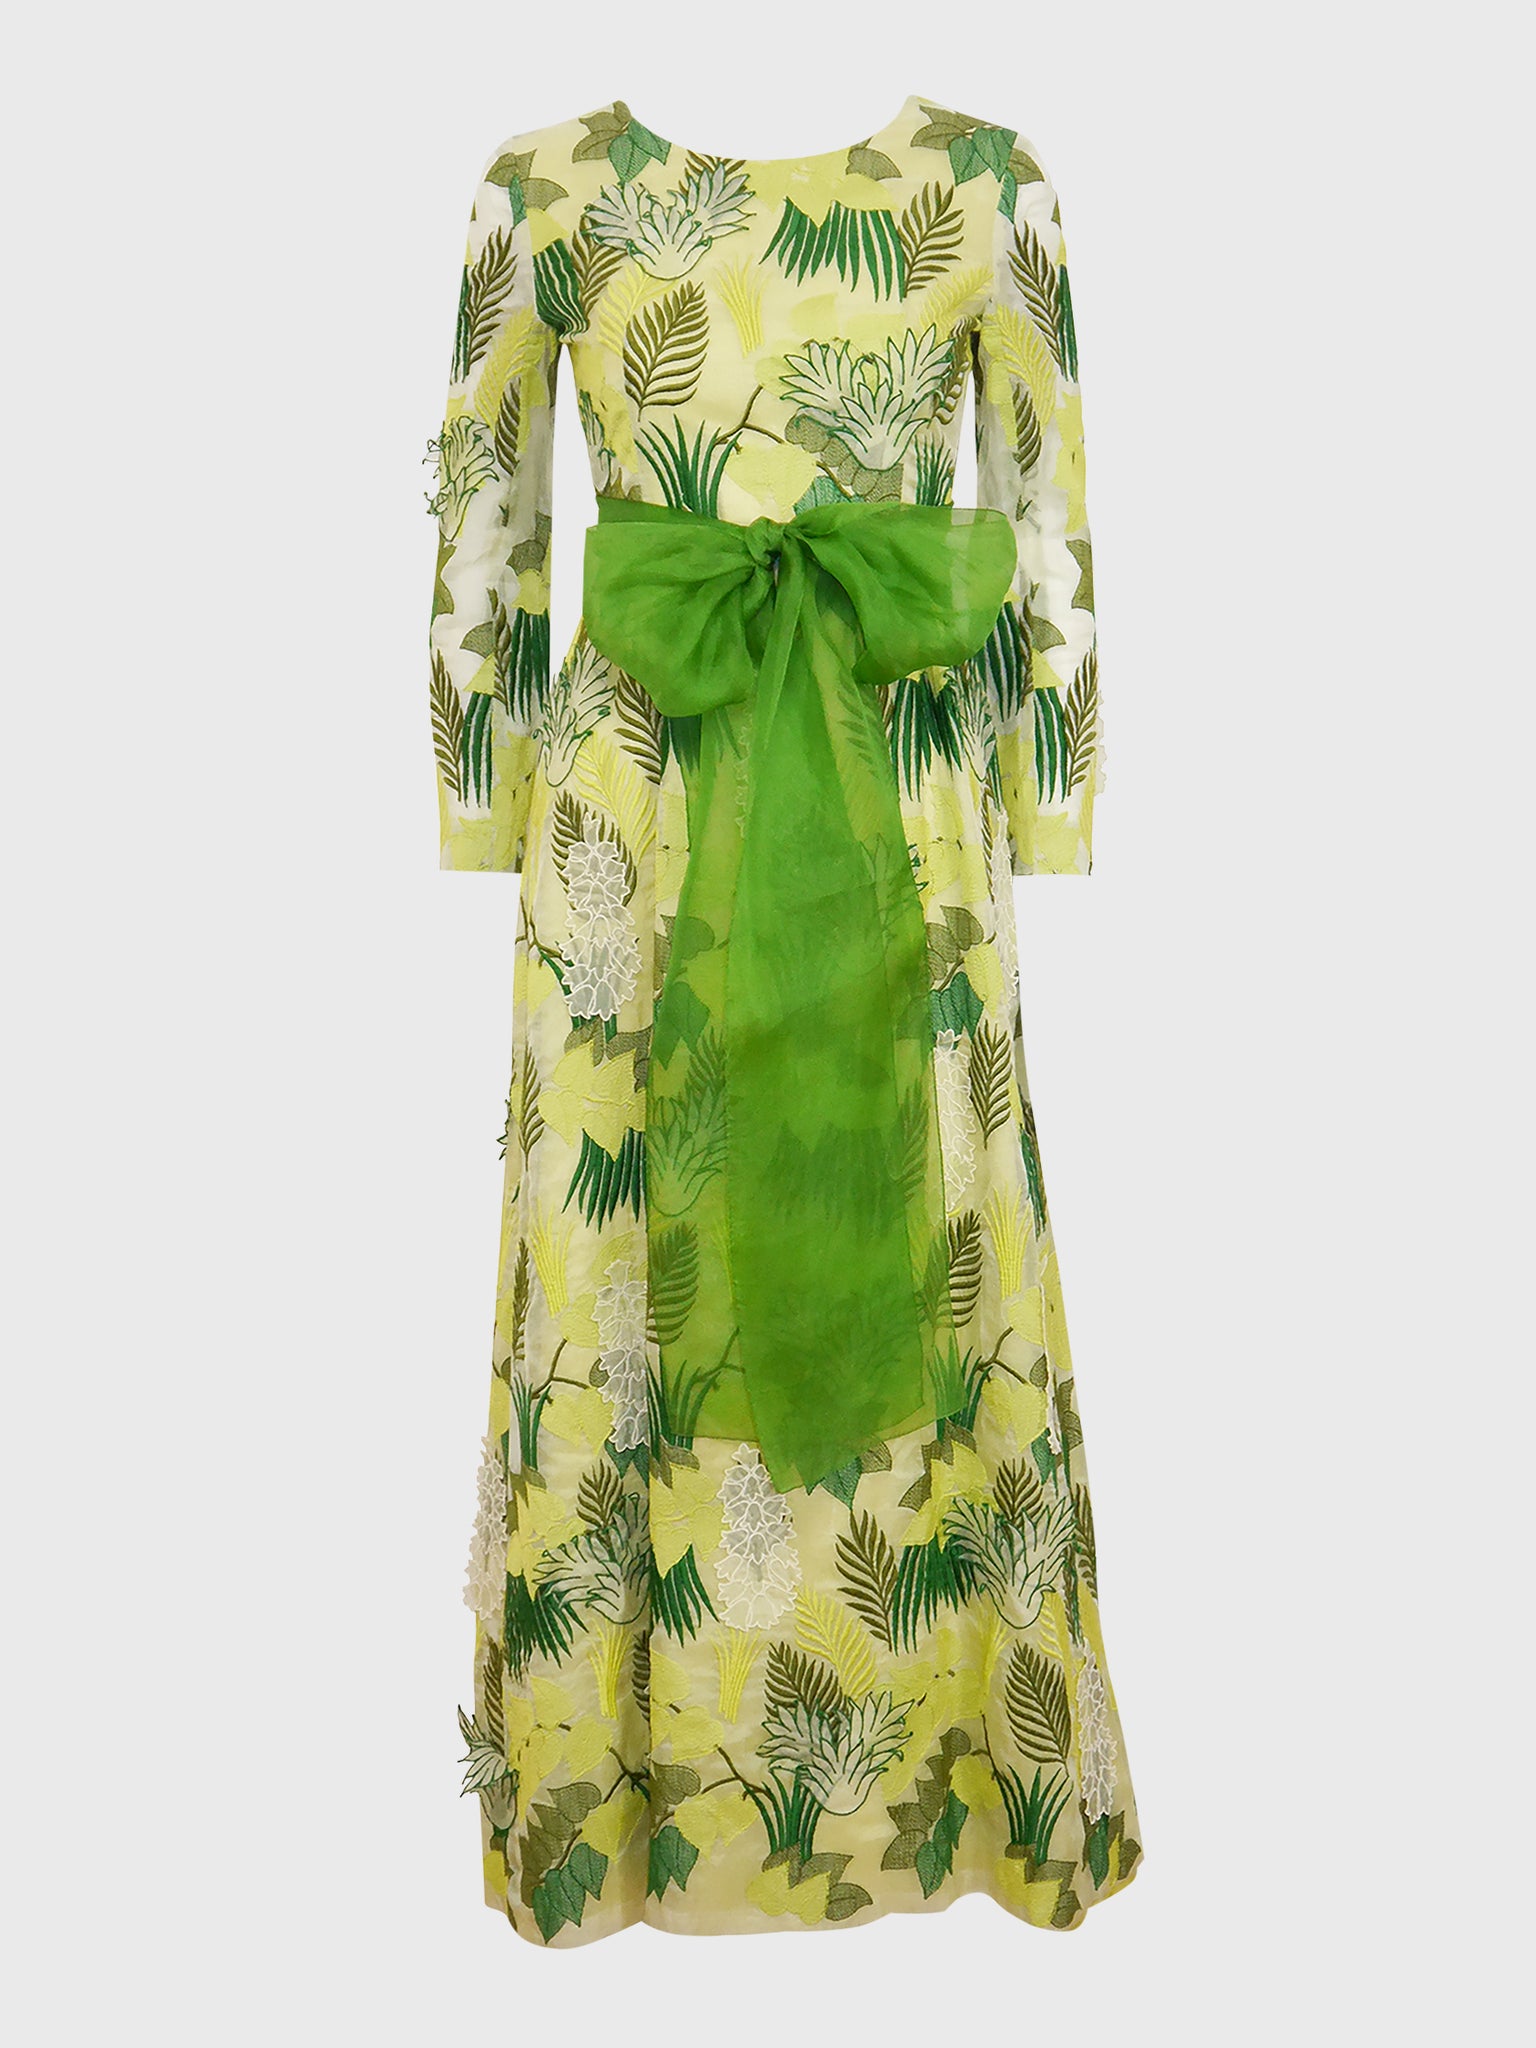 GIVENCHY 1960s Vintage Green Floral Couture Evening Dress